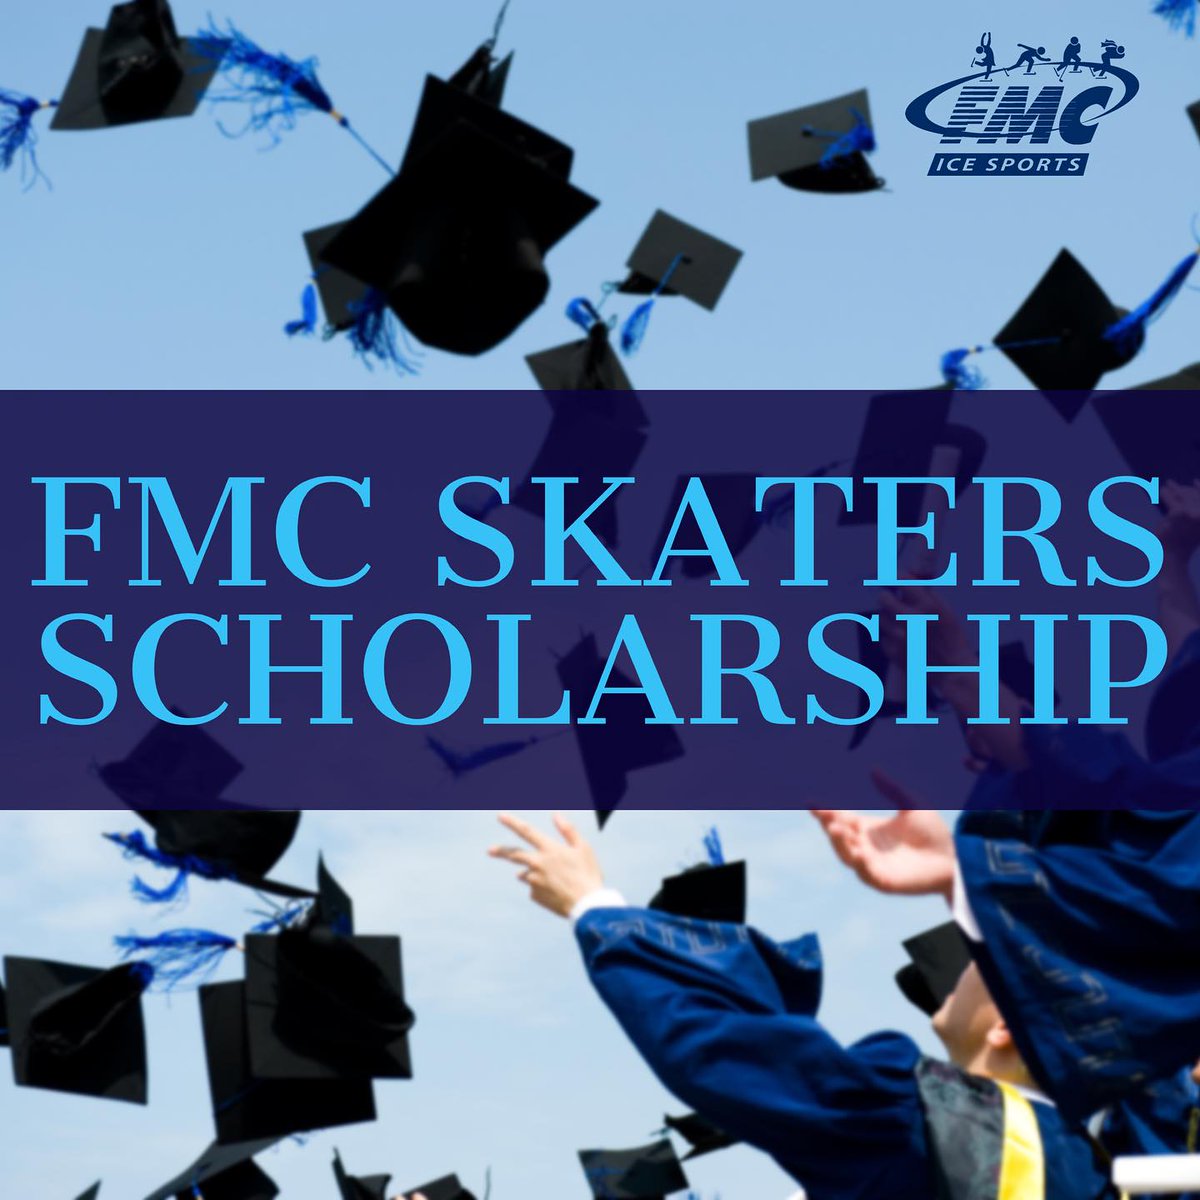 Two weeks to go to get those applications in for the FMC Skaters Scholarship! If you are a graduating senior in high school or know someone who is heading to college in the Fall of 2024 and has skated at any FMC rink, now is the time to apply! fmcicesports.com/about-fmc/scho…